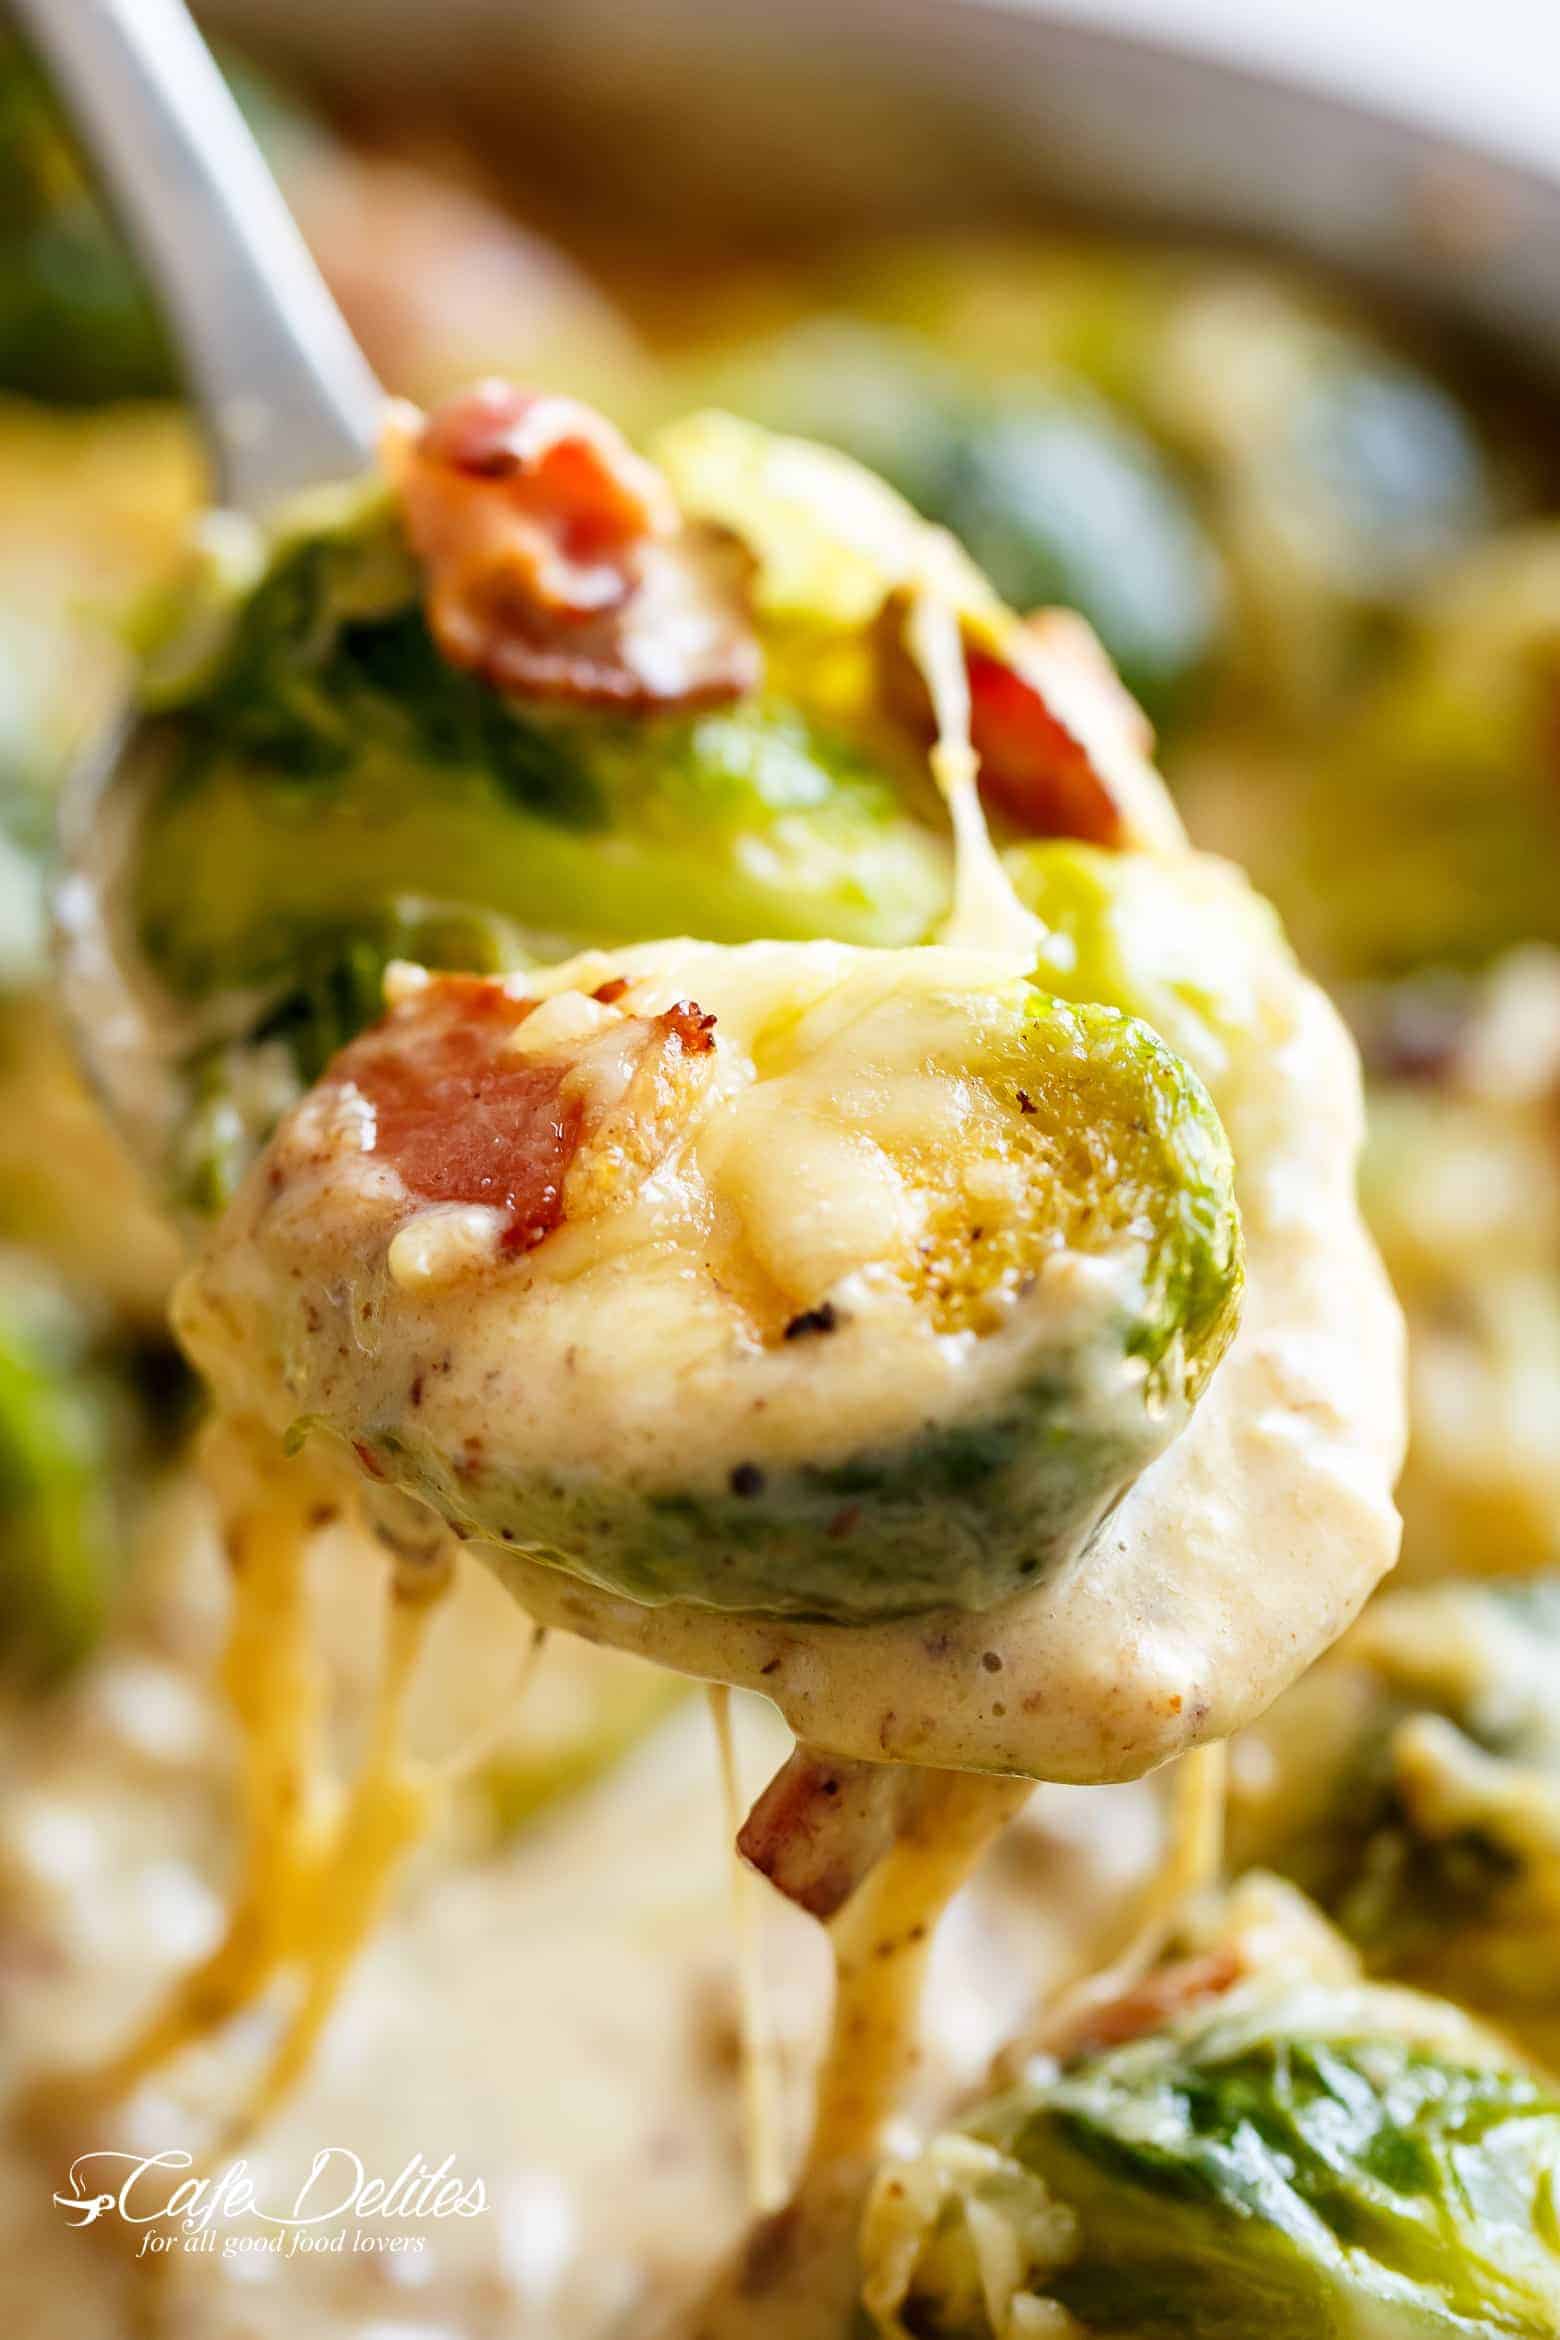 Brussel Sprouts with Bacon in a cheese sauce scooped up with a metal spoon ready to serve.